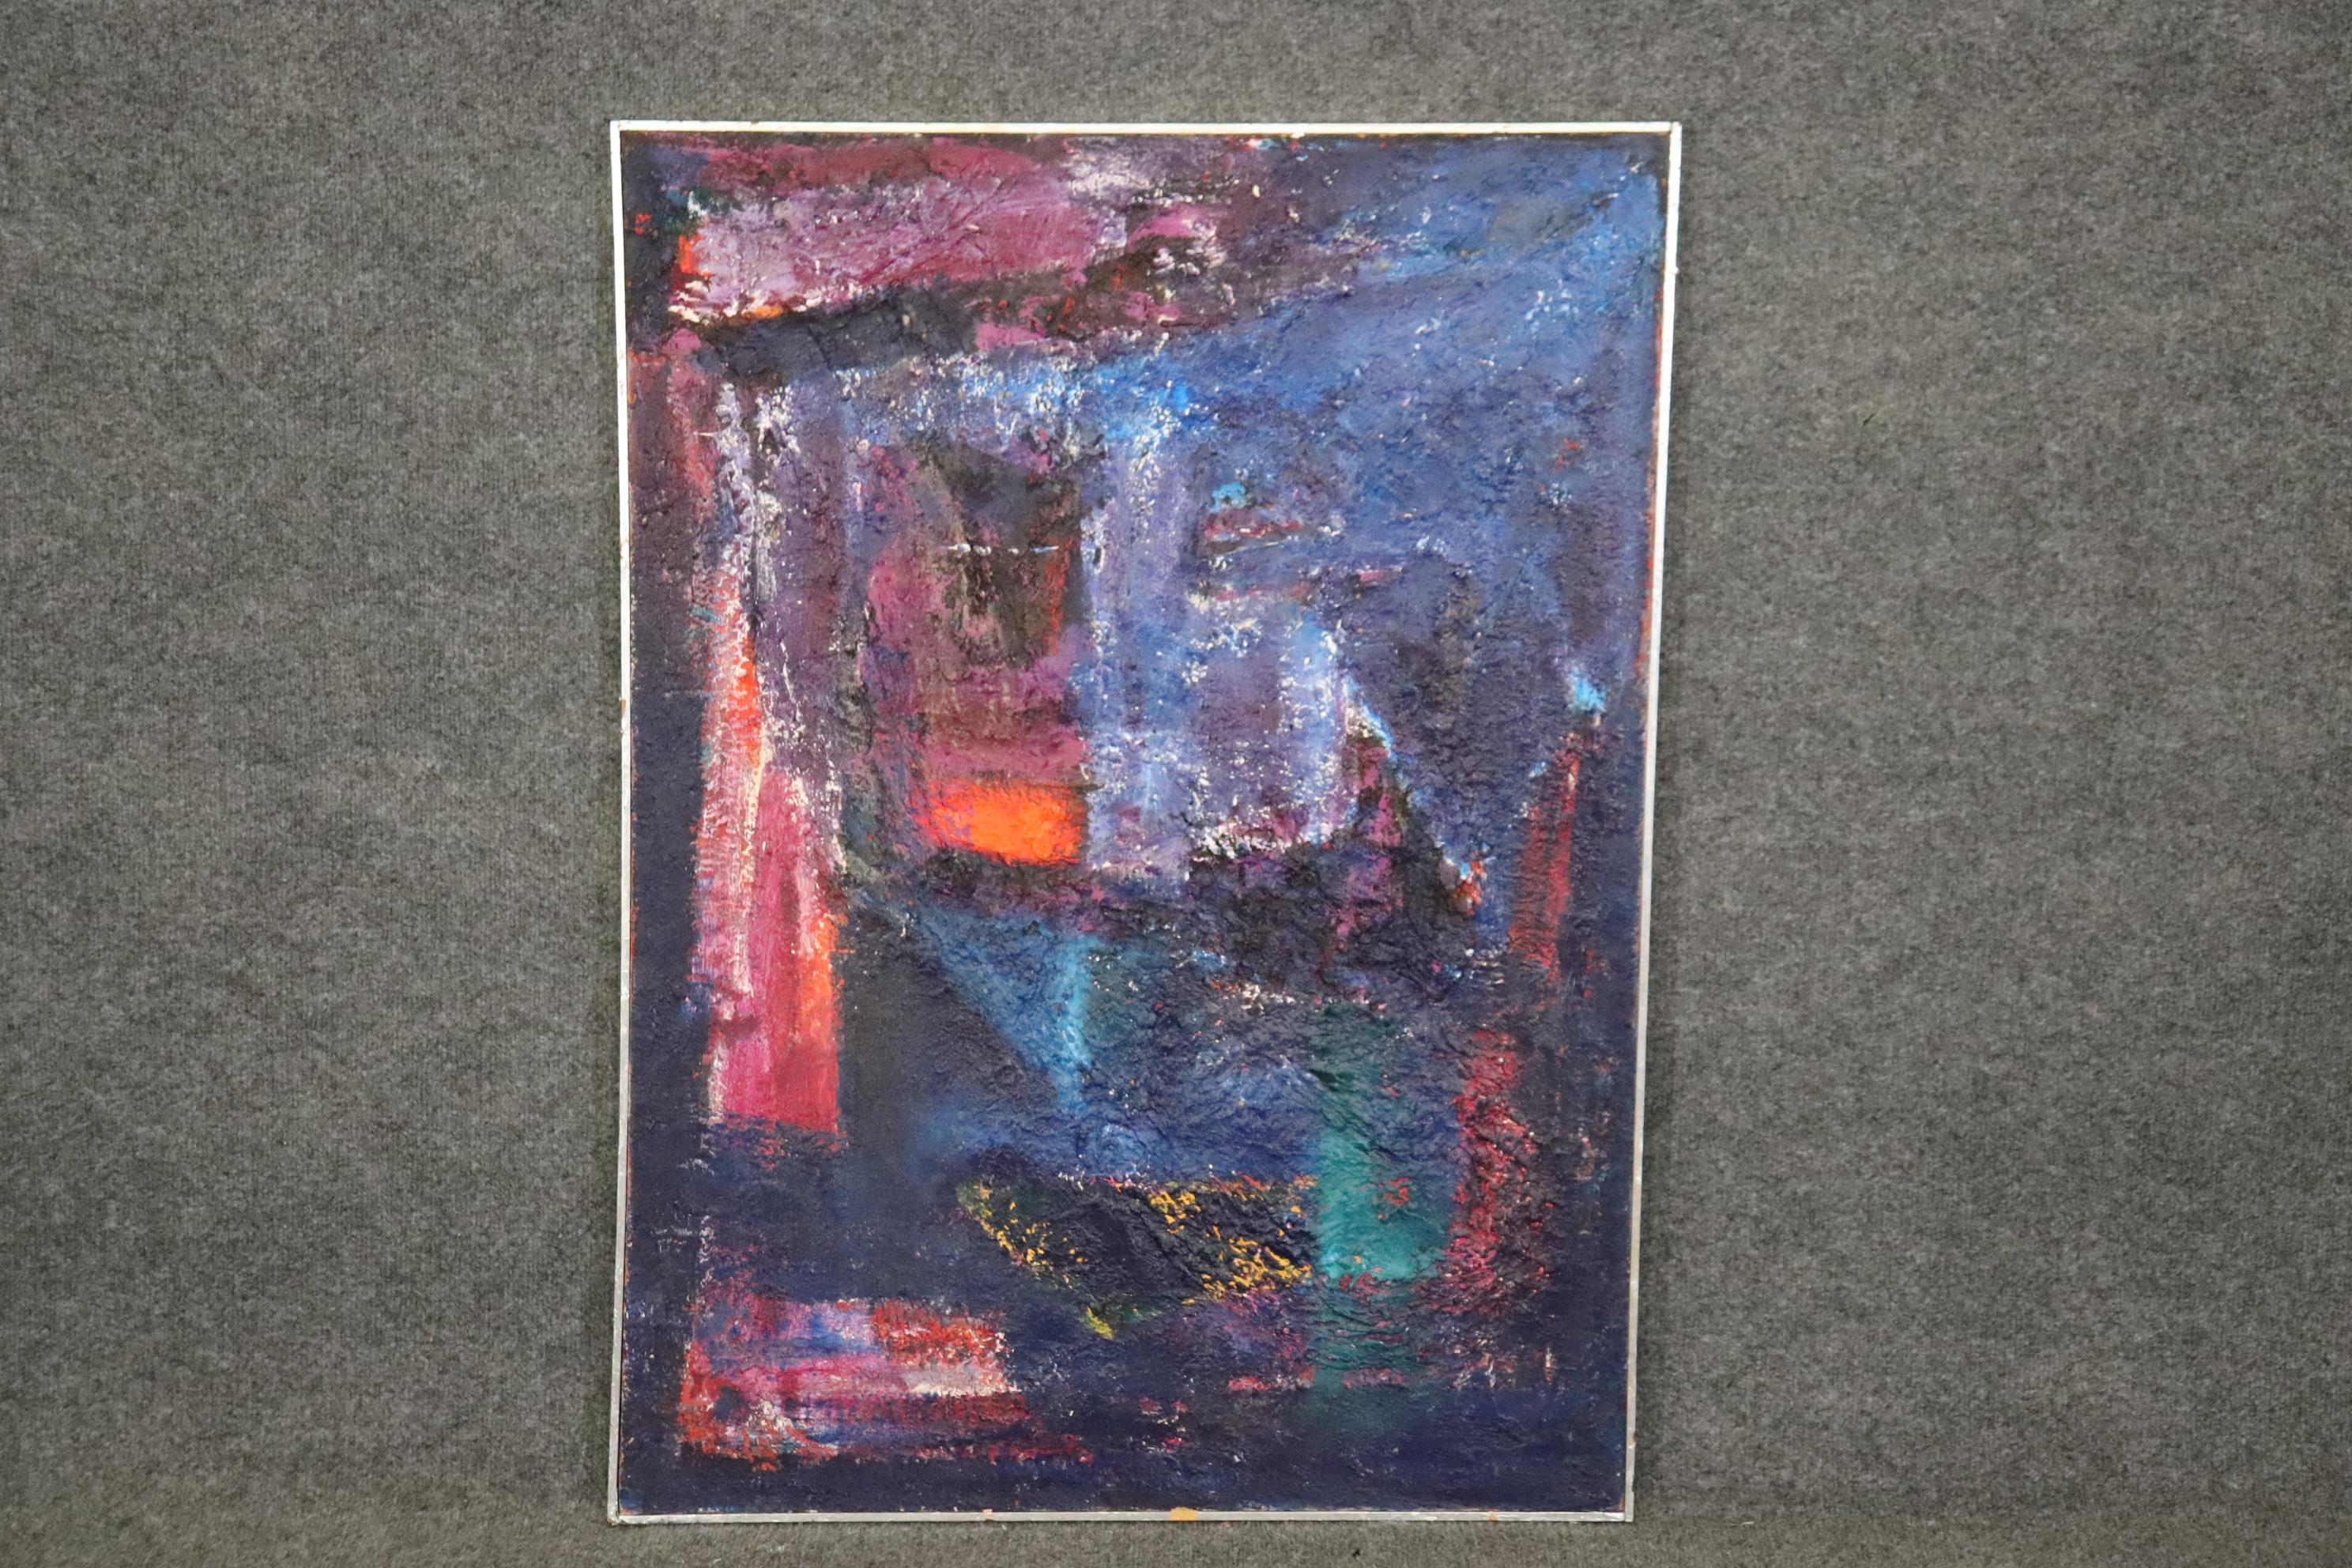 Dimensions: Height: 38 3/4in Width: 28 3/4in Depth: 1in 

This vintage abstract painting on canvas is perfect for you and your home!   If you look at the photos provided, you can see the detail in the heavy paint application. This Mid Century Modern